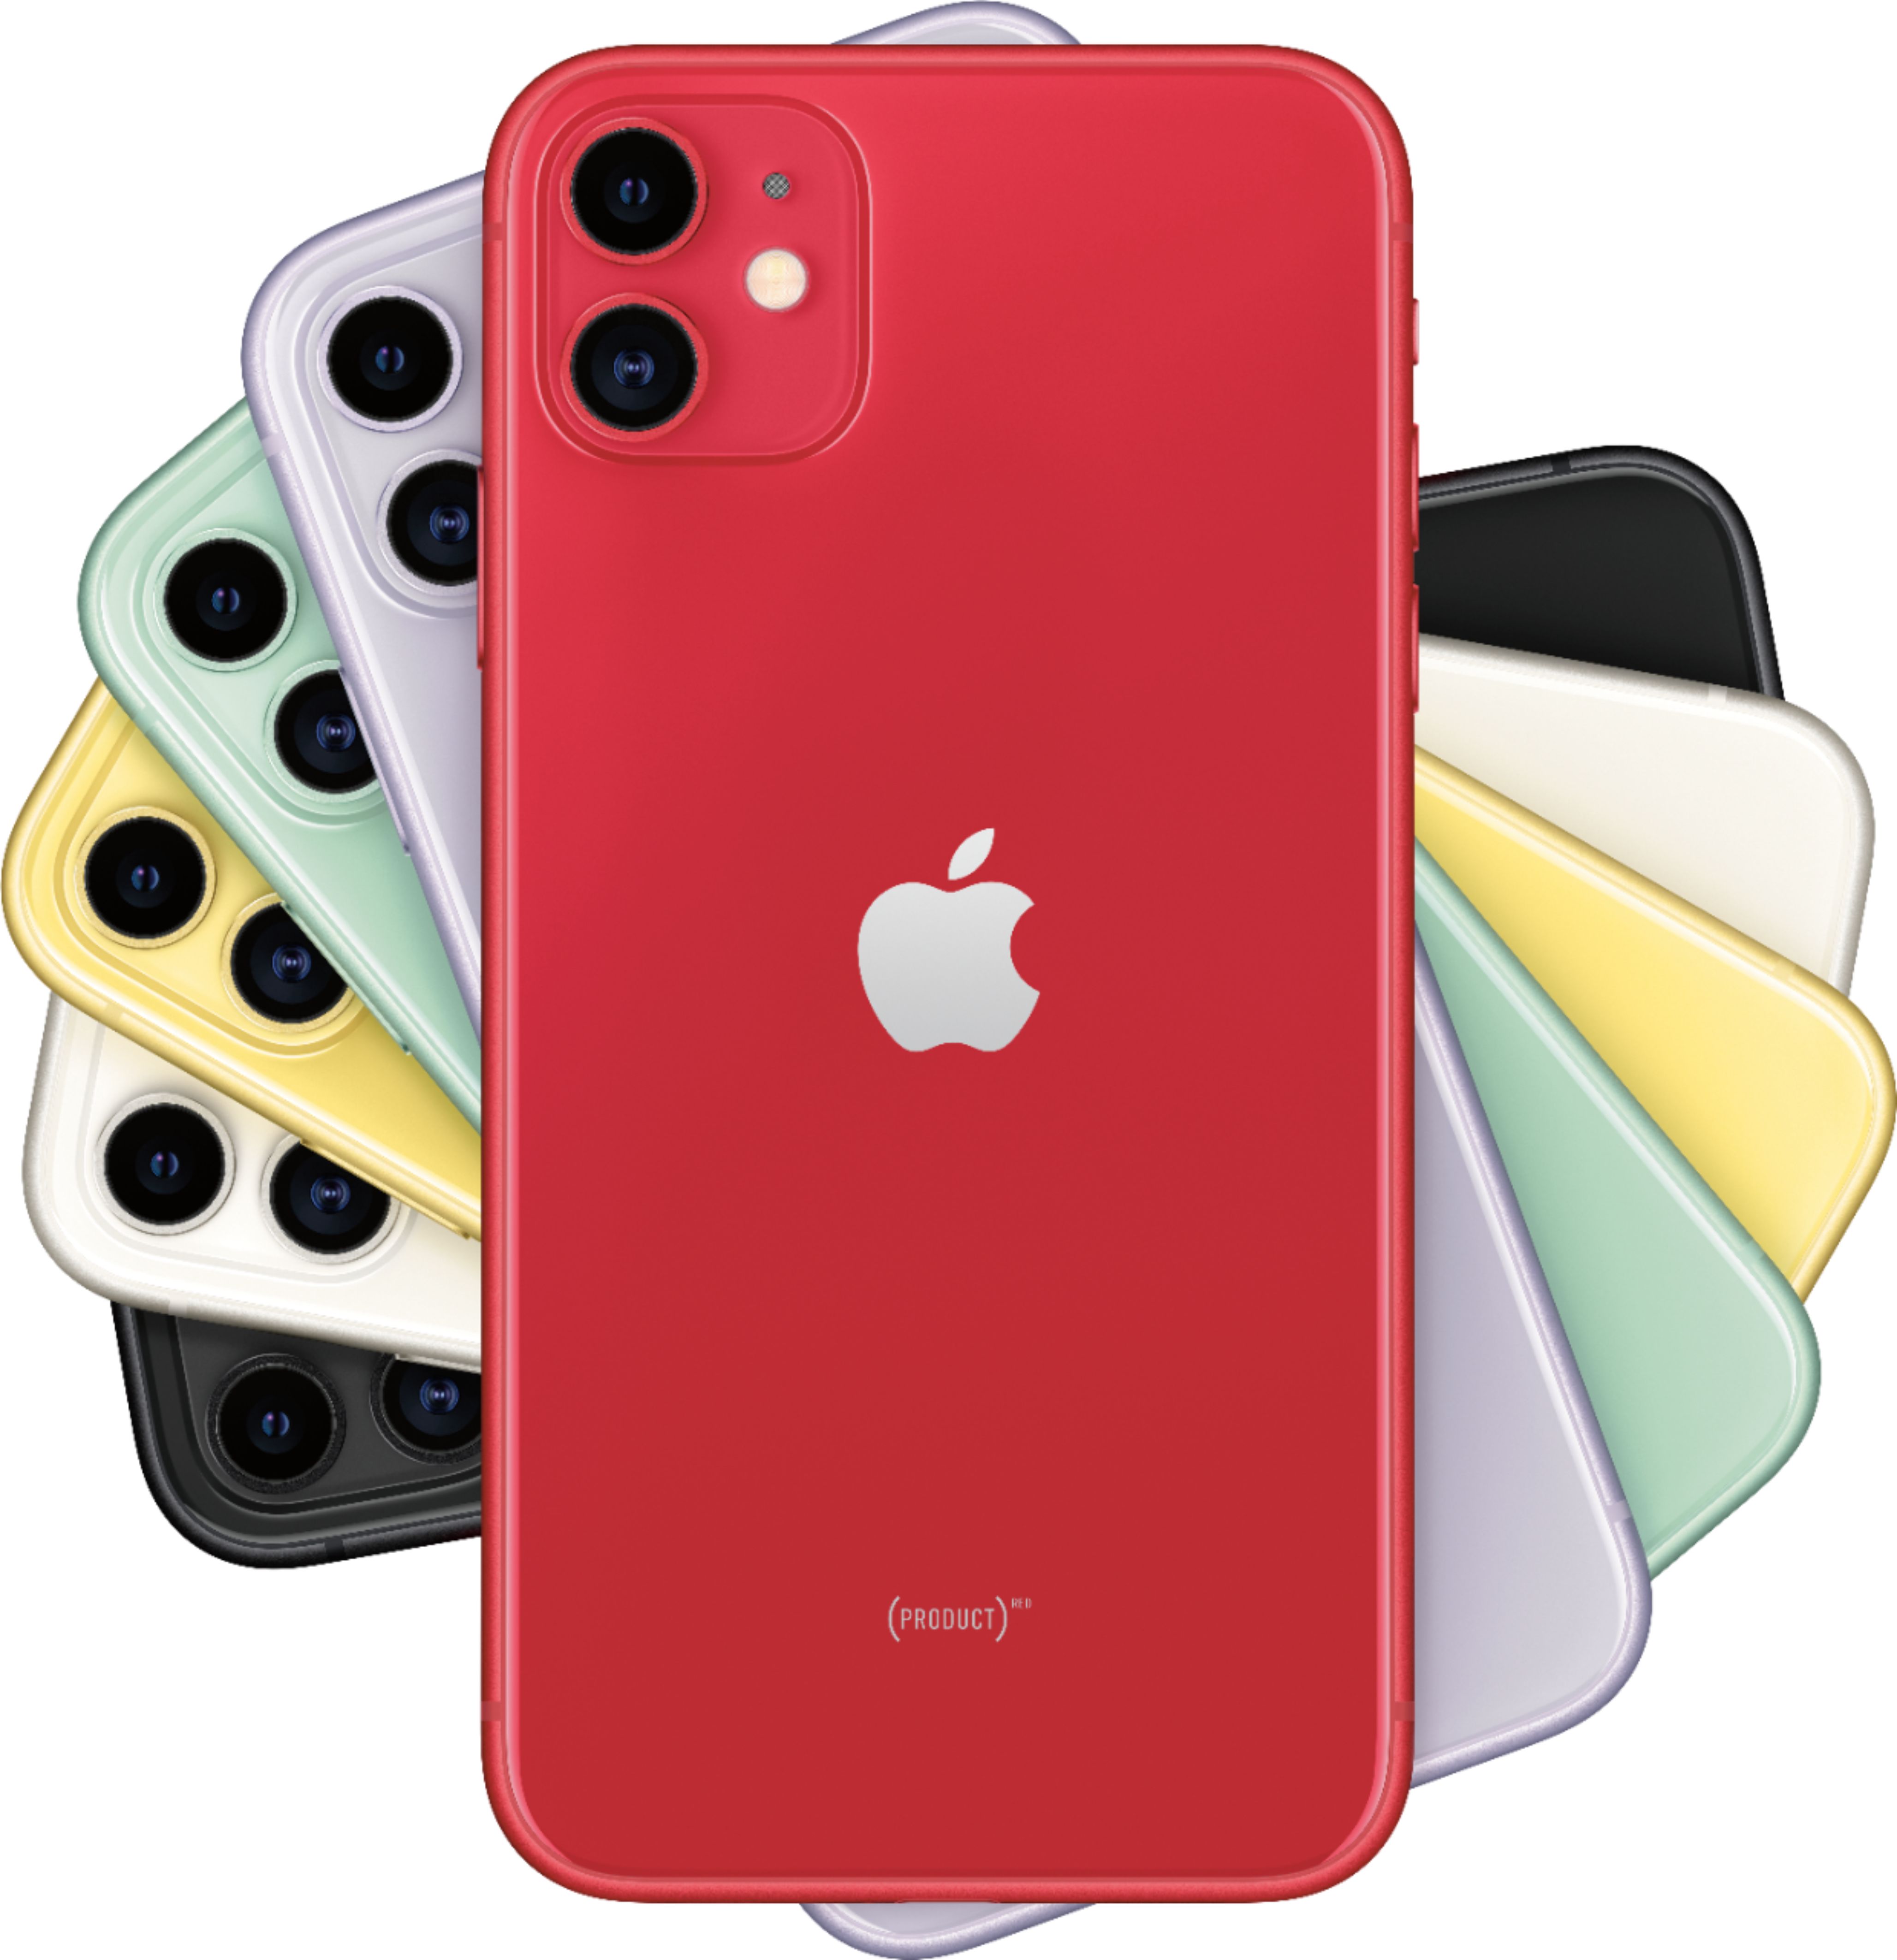 iPhone 11 (PRODUCT)RED 256 GB Softbank-